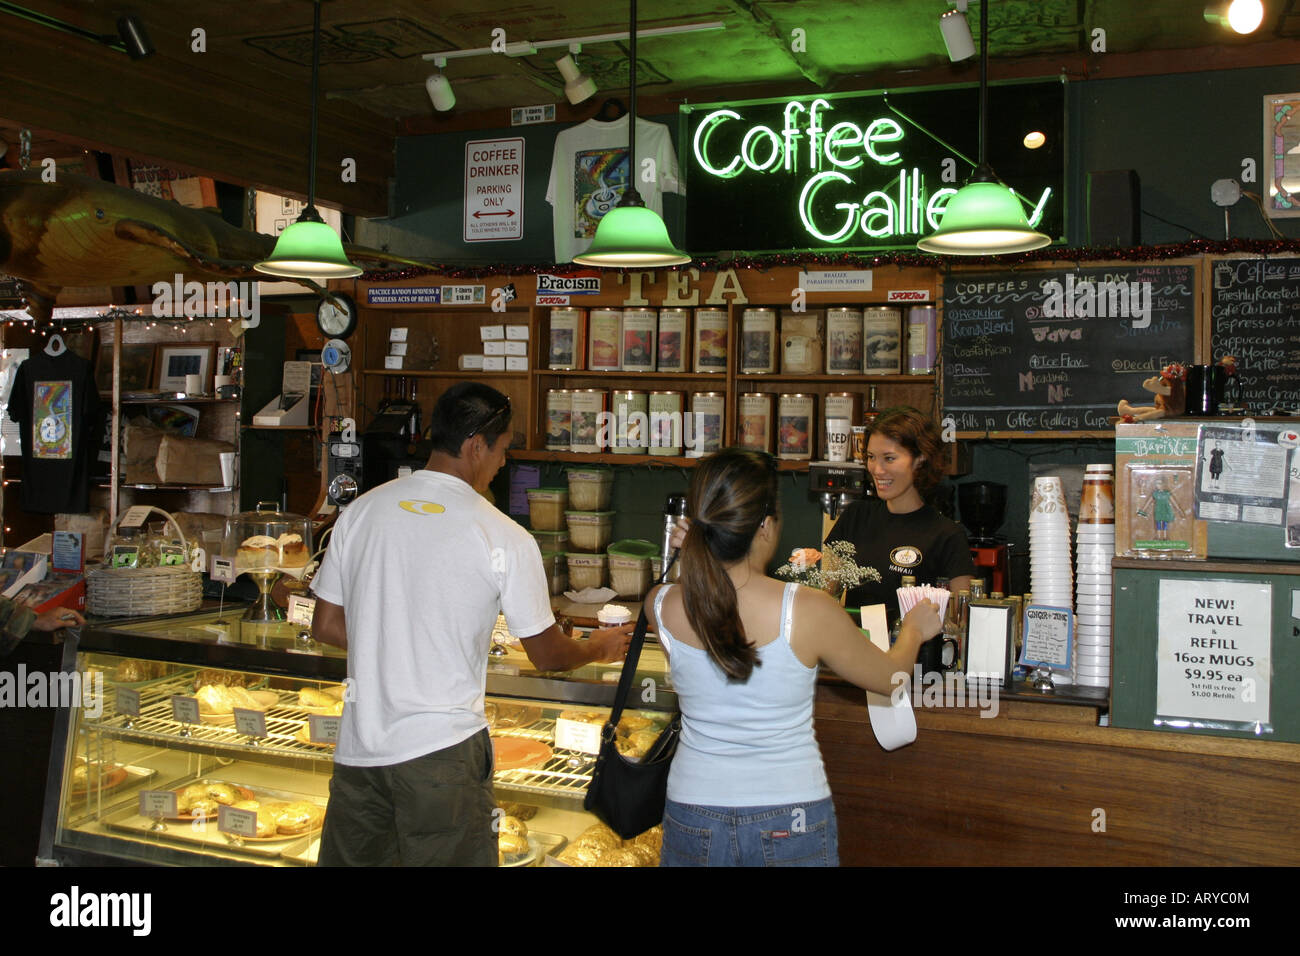 Shoppers stop for a little pick me up at the Coffee Gallery. Gallery features a variety of kona coffees as well as Stock Photo